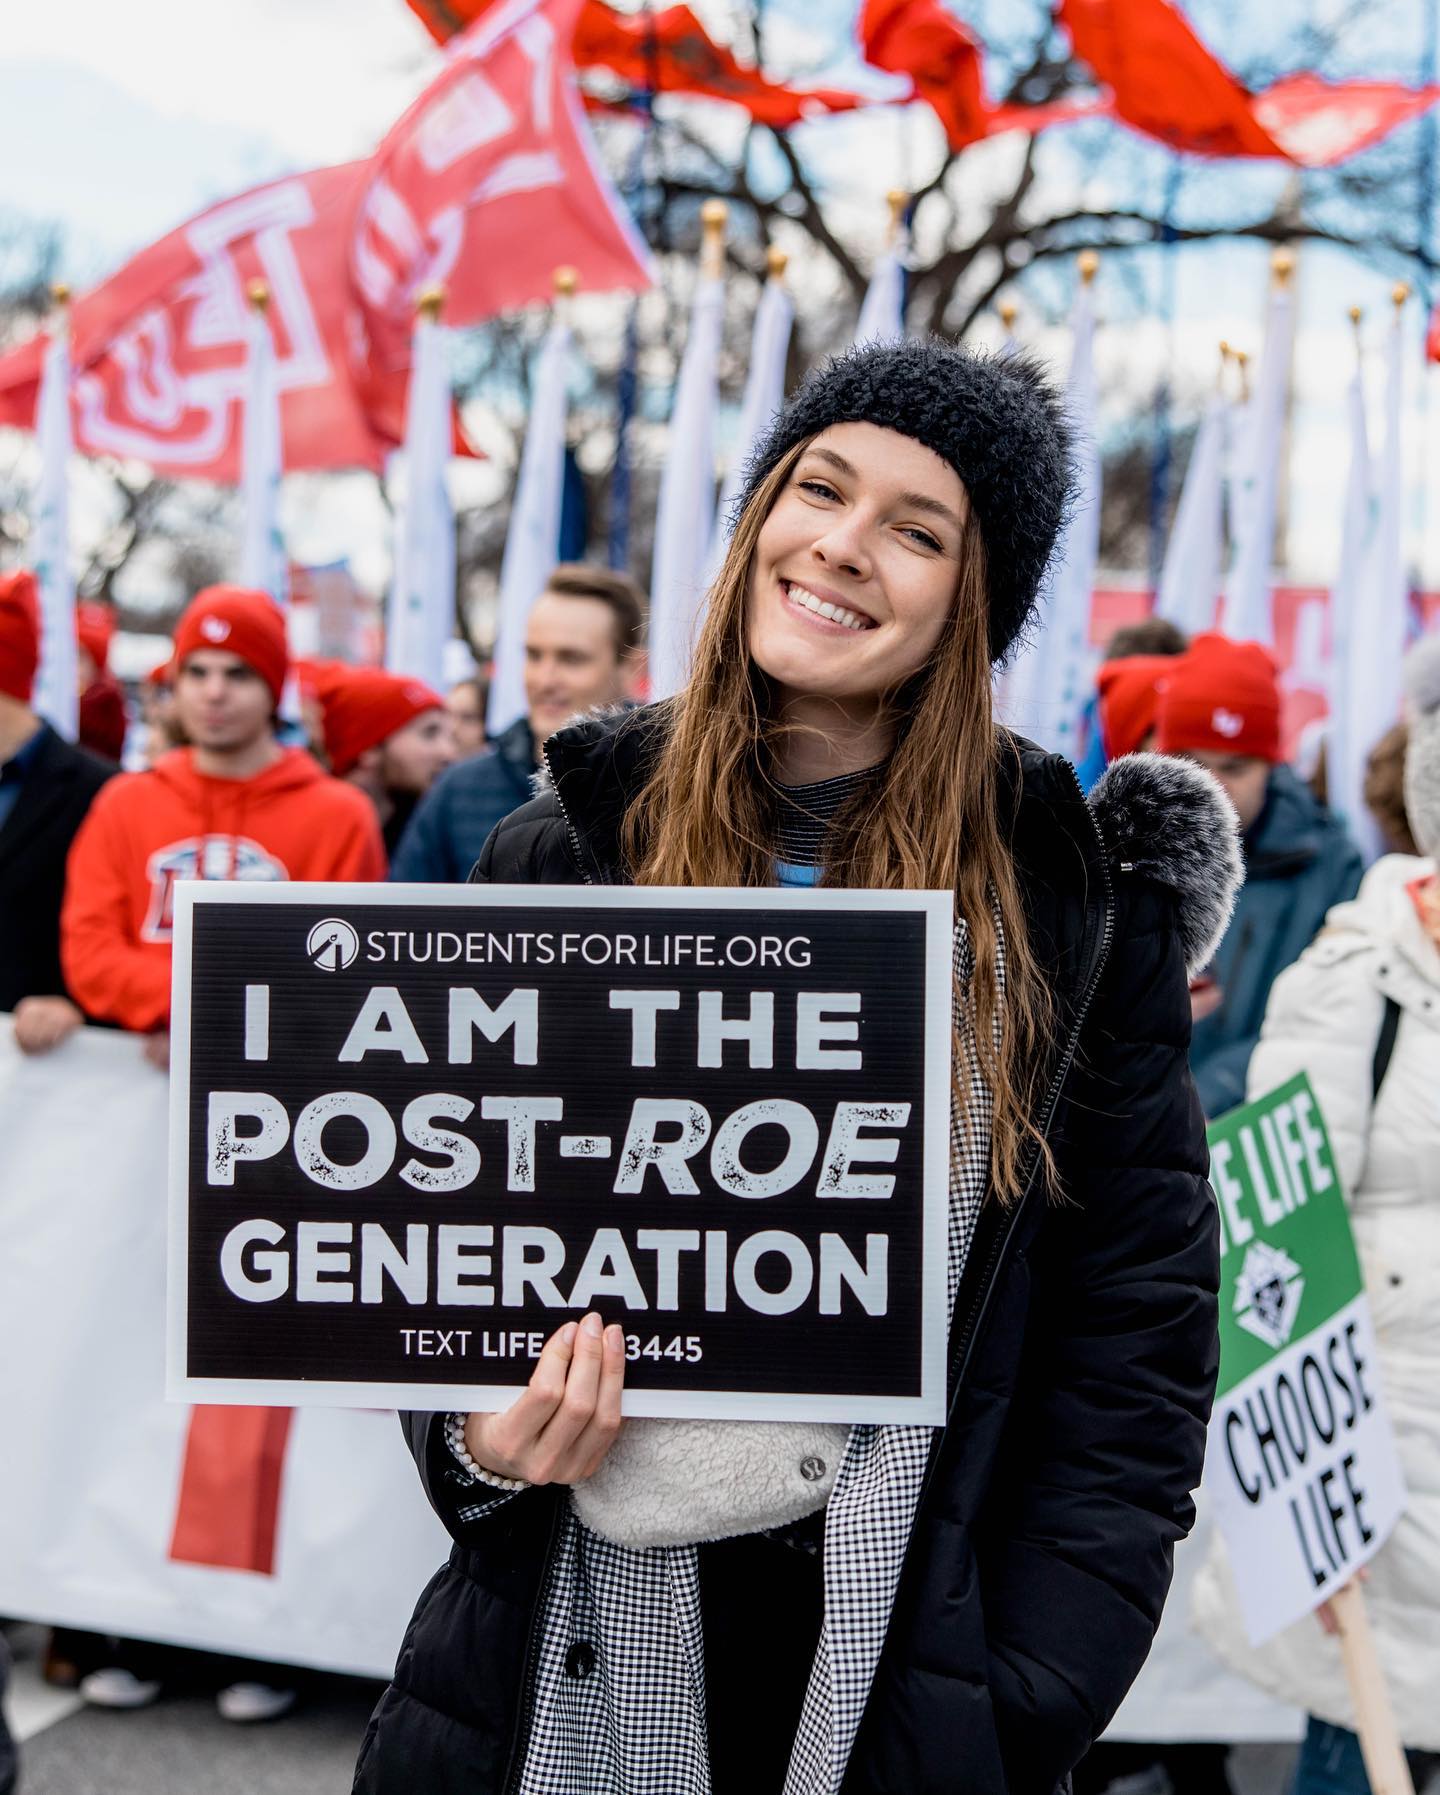 27.1.2023 – First annual March for Life in Washington DC since overturning of Roe v Wade